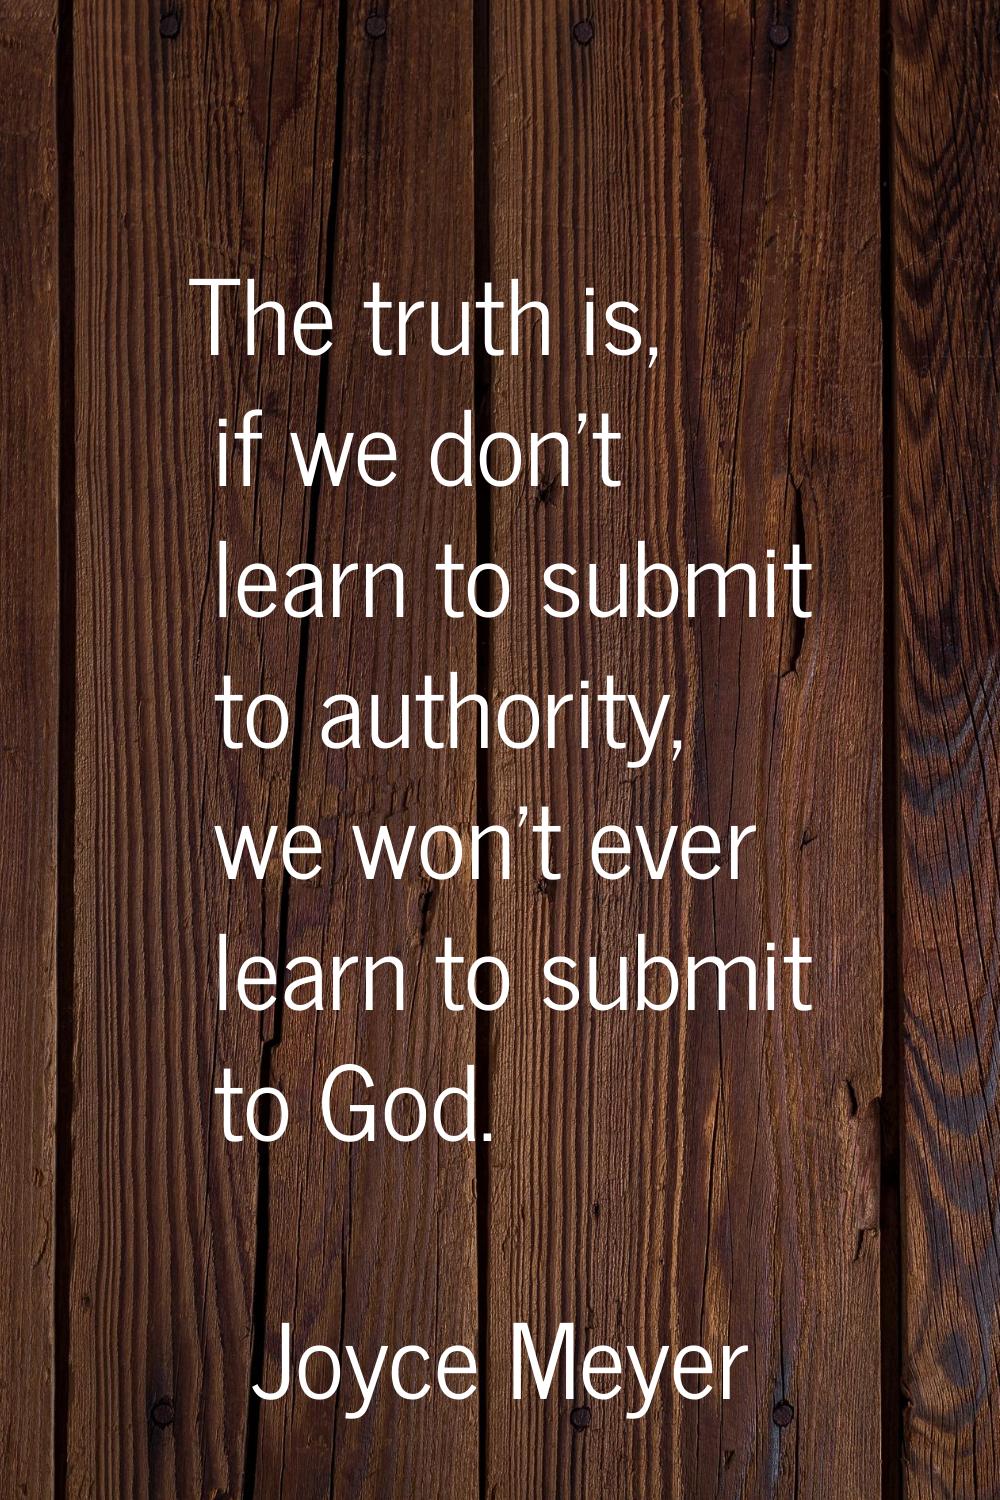 The truth is, if we don't learn to submit to authority, we won't ever learn to submit to God.